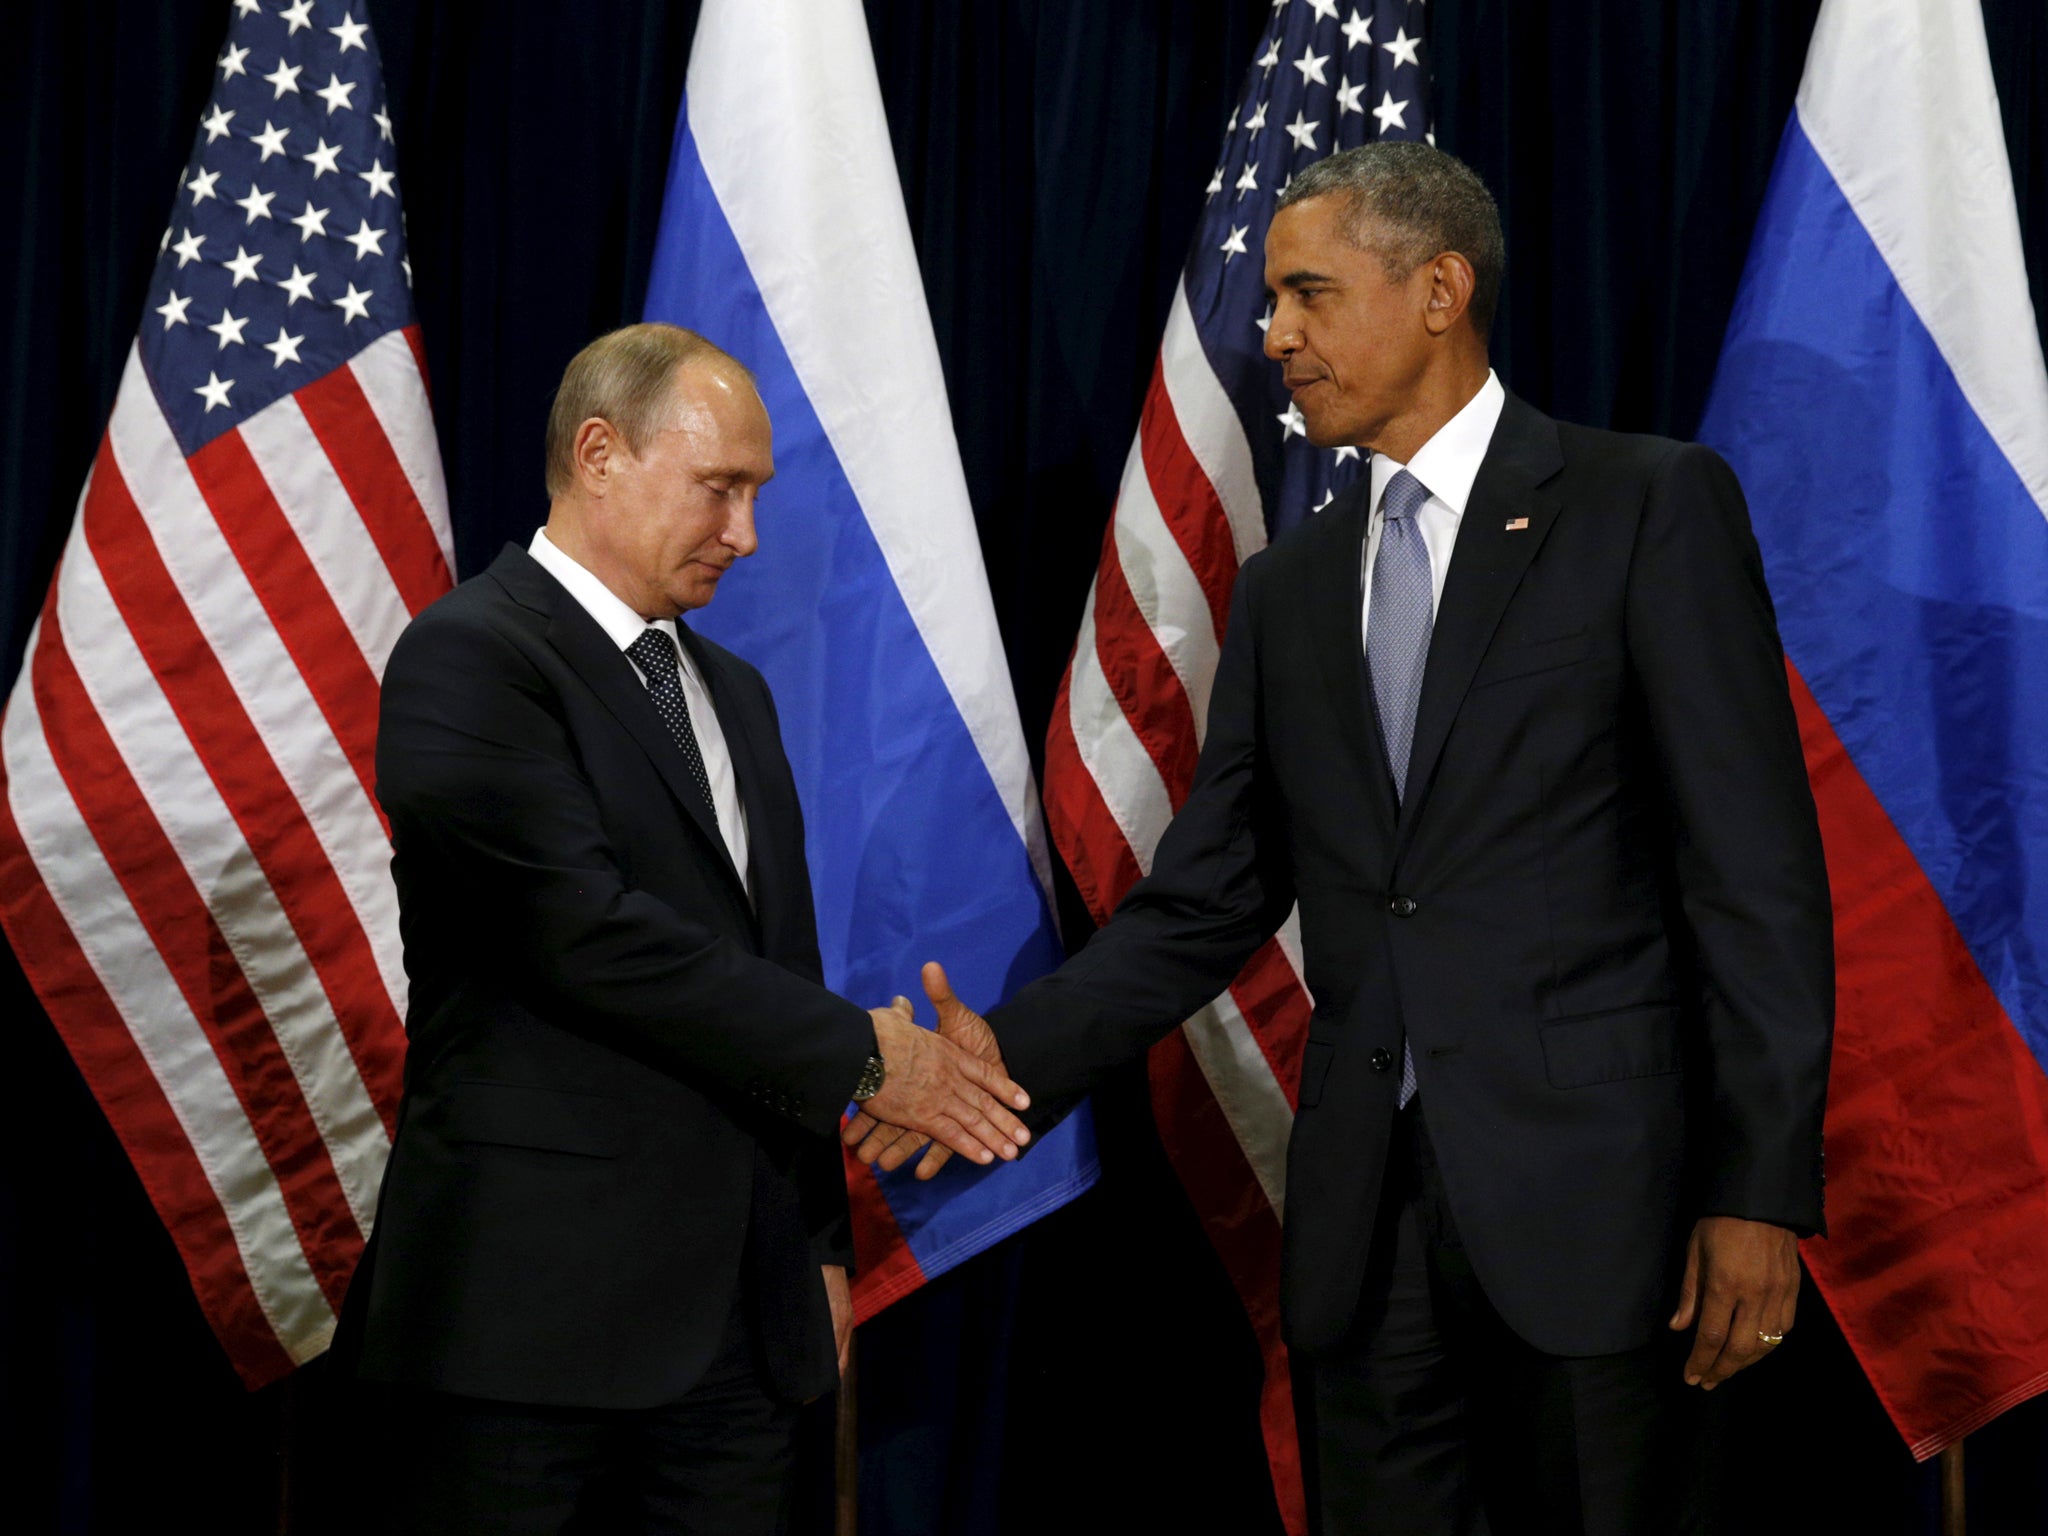 US President Barack Obama shakes hands with Russian President Vladimir Putin in happier times